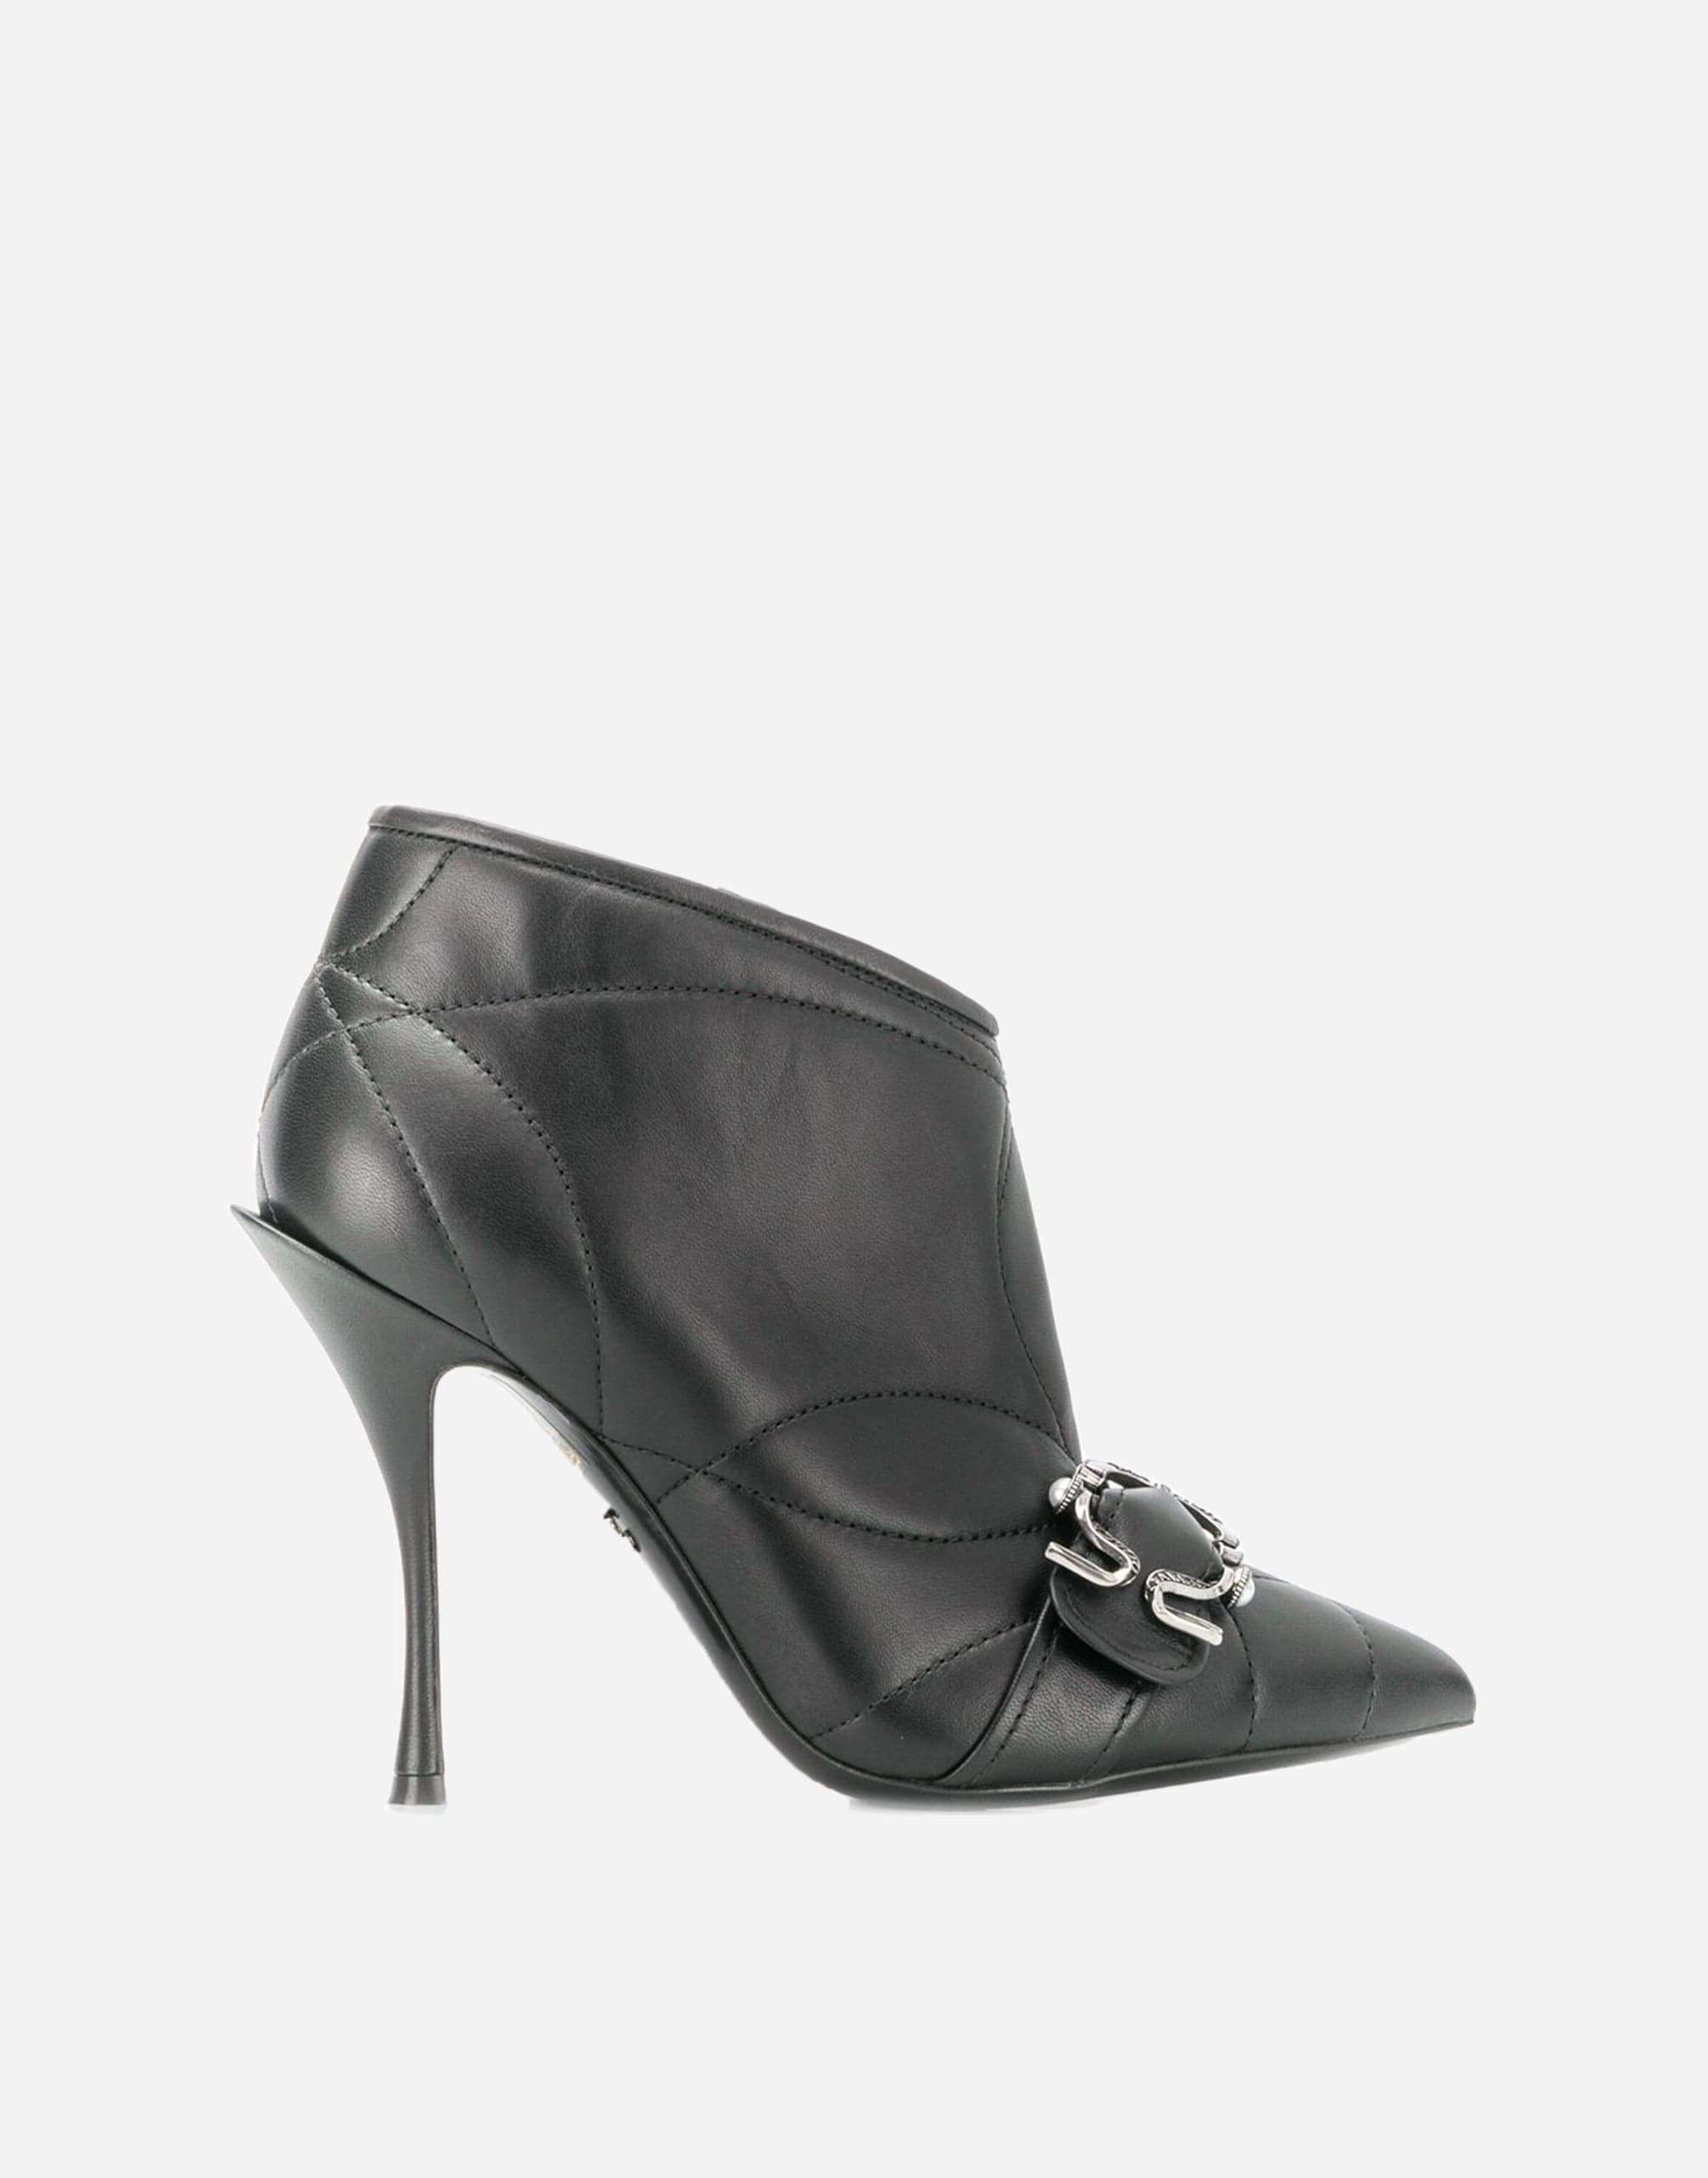 Dolce & Gabbana Devotion Quilted Buckled Booties